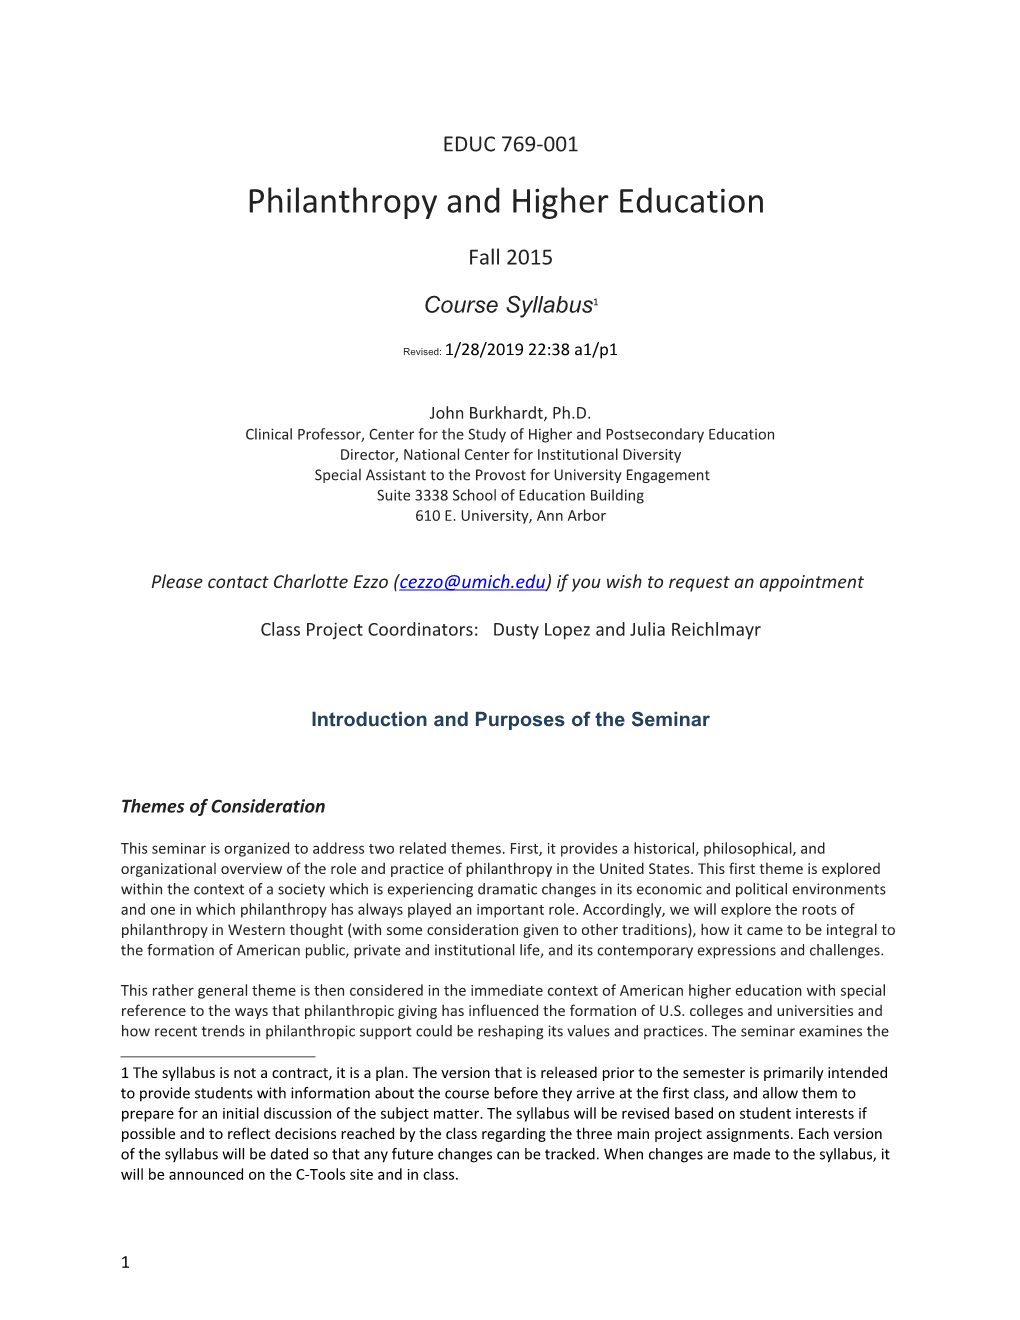 Philanthropy and Higher Education